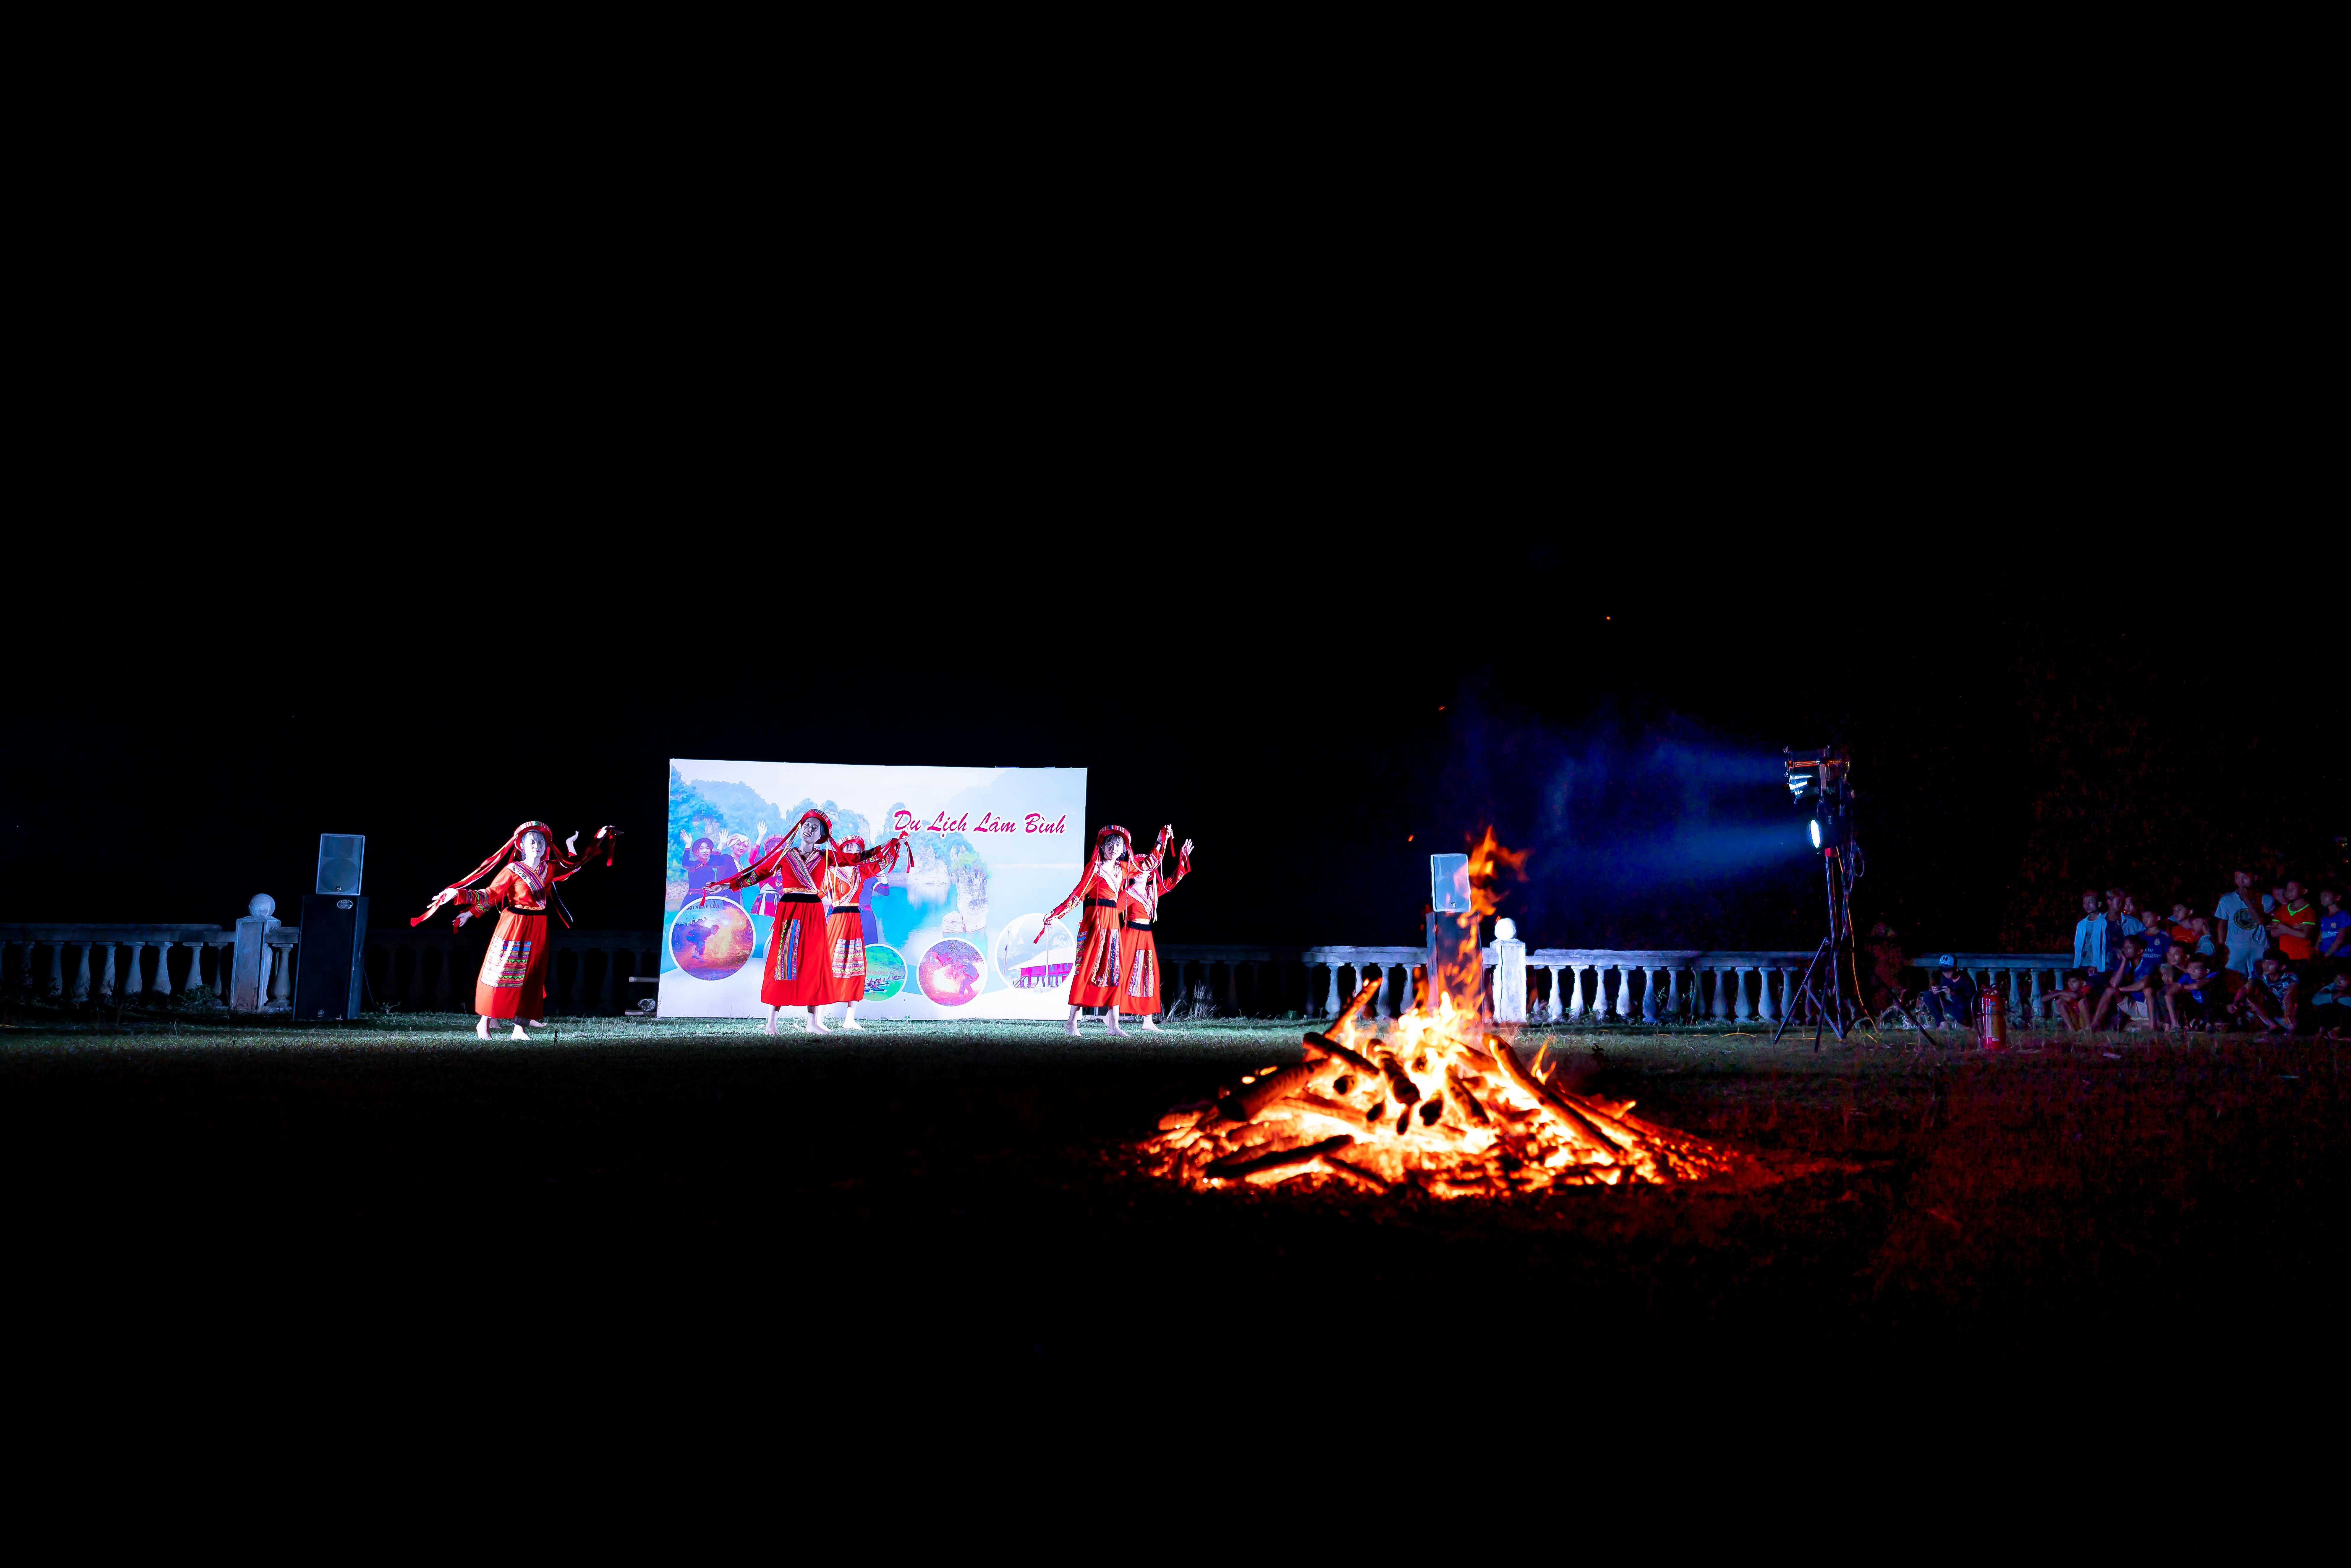 unrecognizable women dancing on stage near fire during traditional event at night